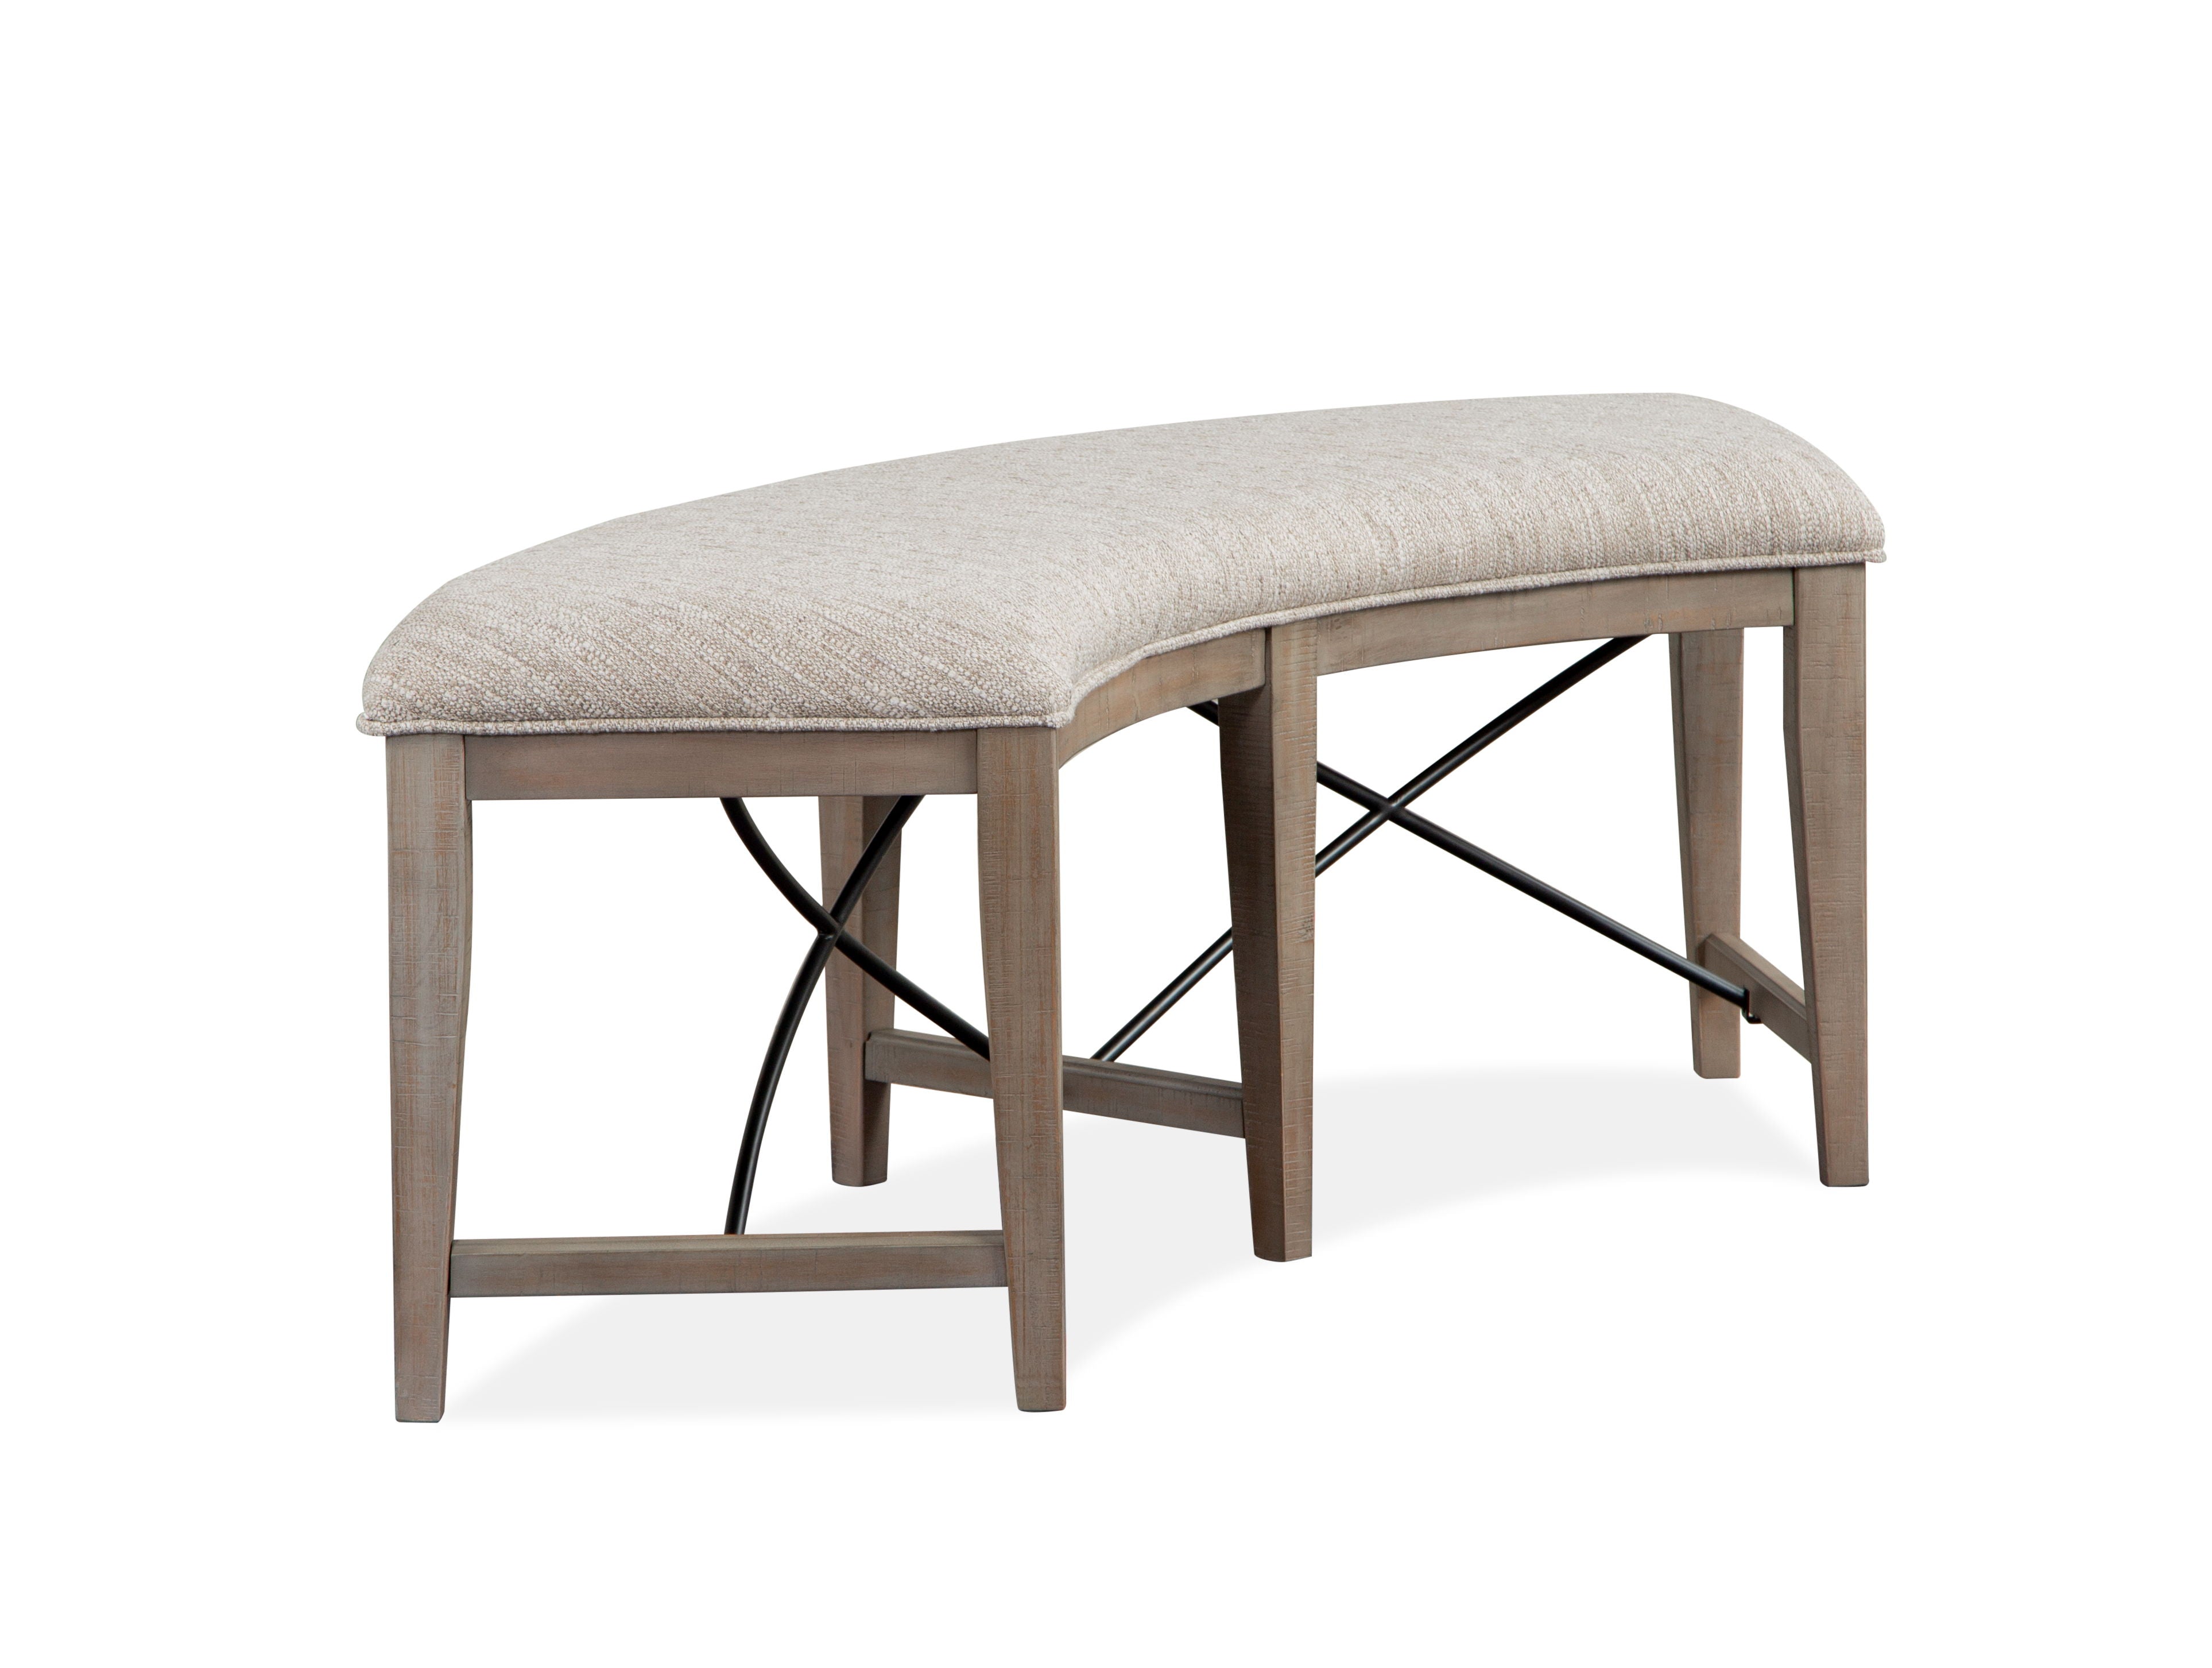 Paxton Place - Curved Bench With Upholstered Seat - Dovetail Grey